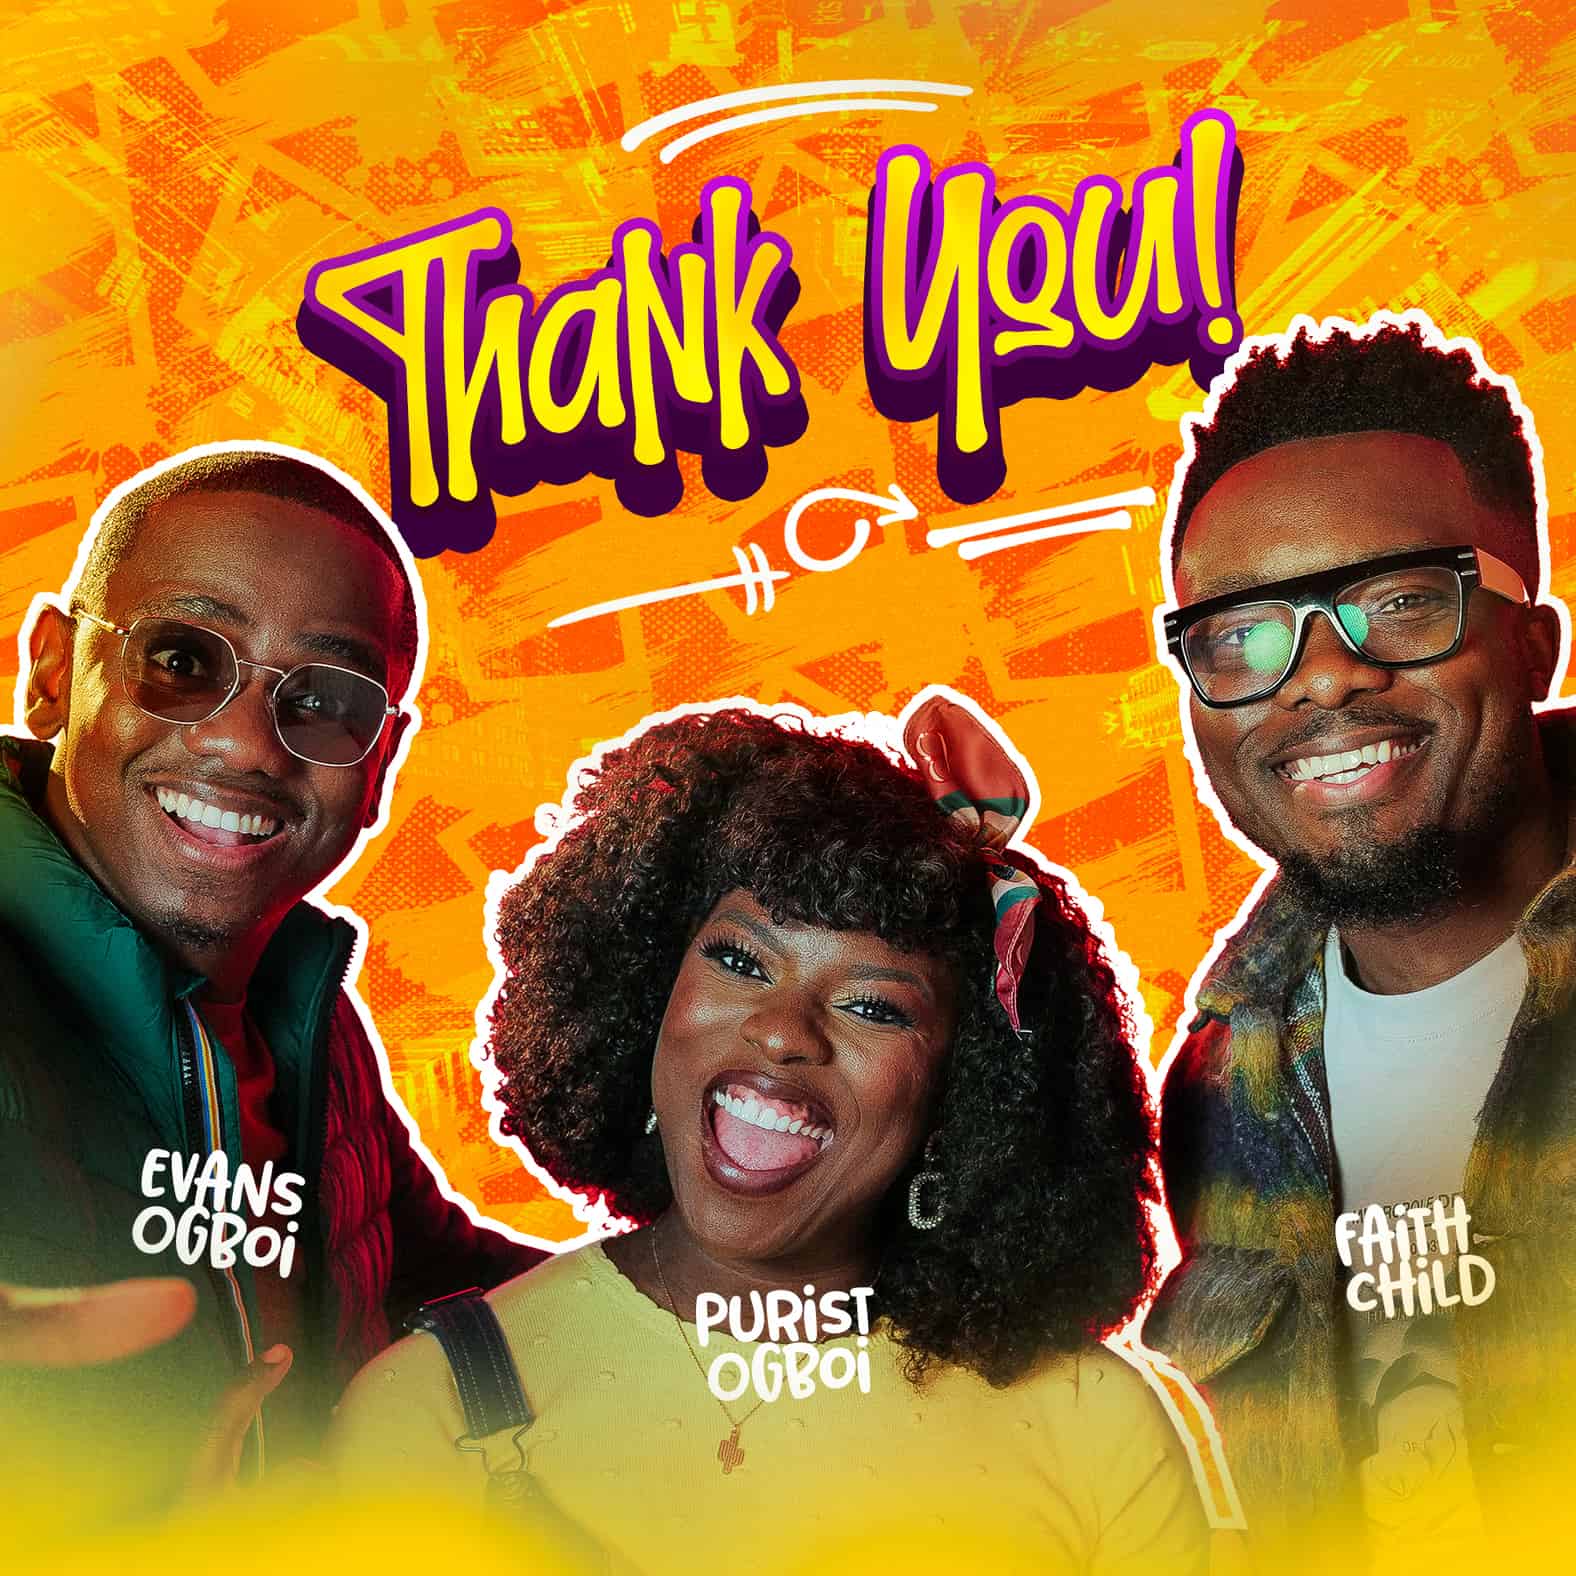 Download Mp3: Purist Ogboi - Thank You ft Evans Ogboi & Faith Child